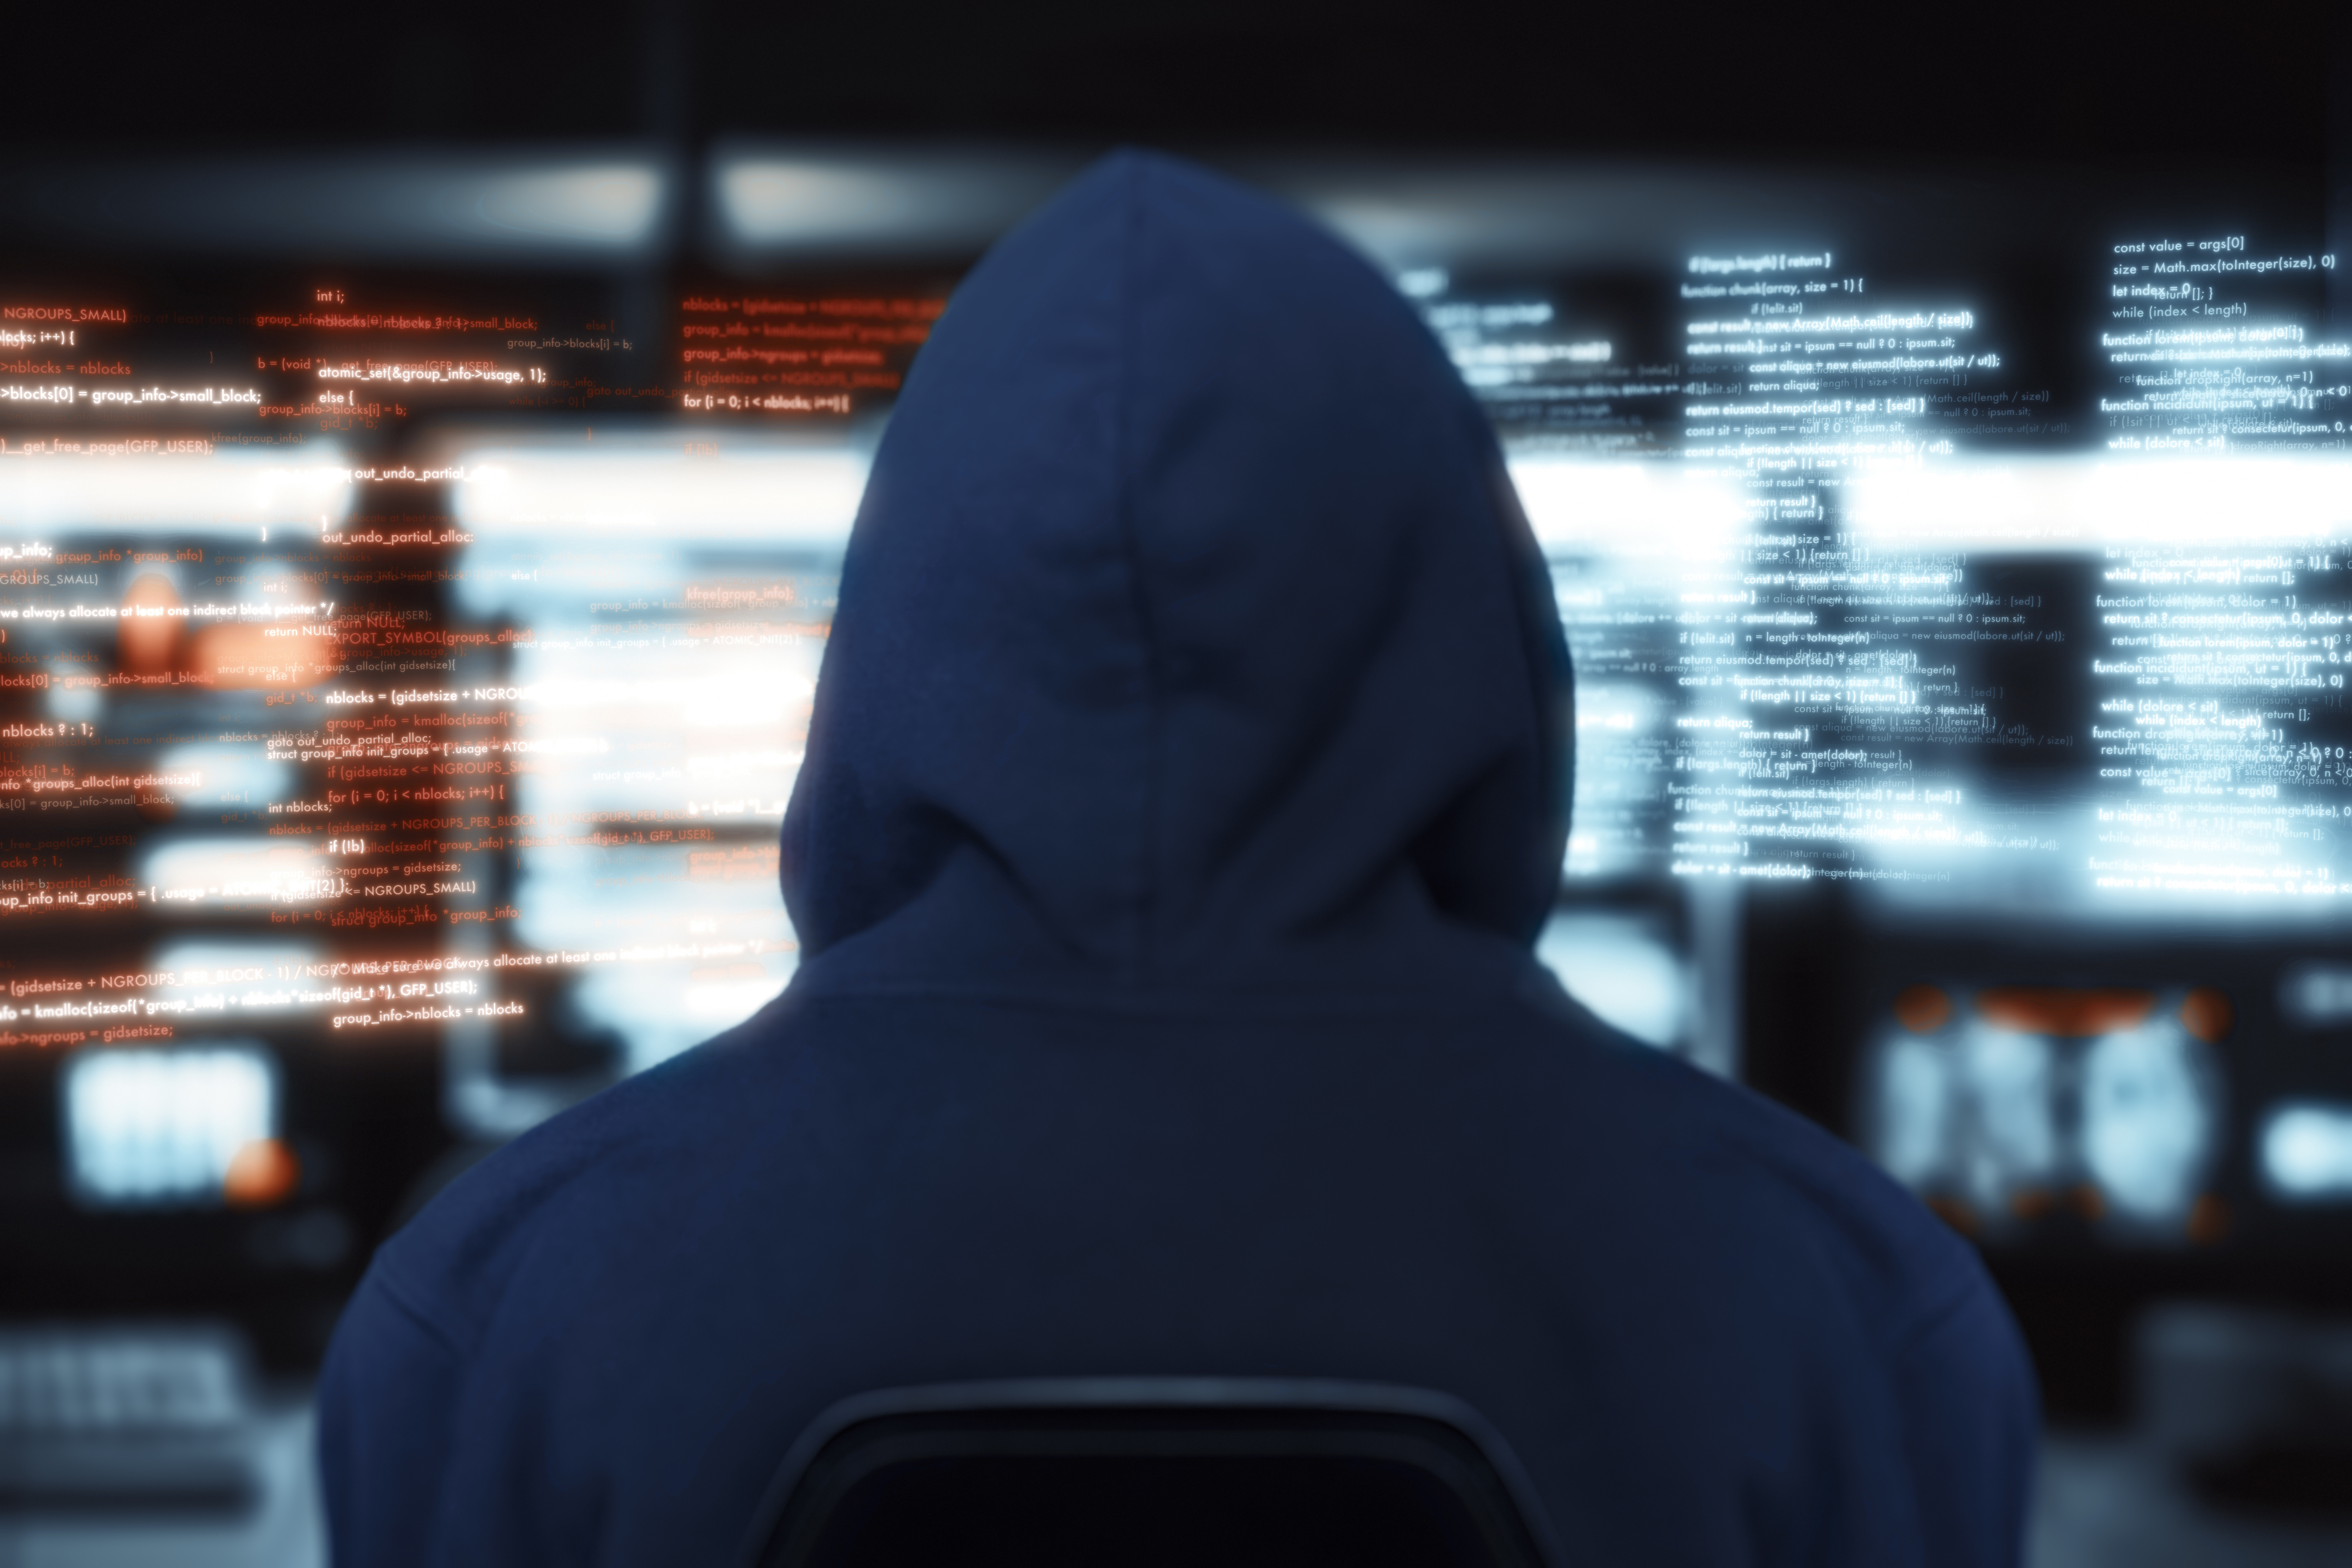 A hacker wearing a hoodie in front of multiple computer screens